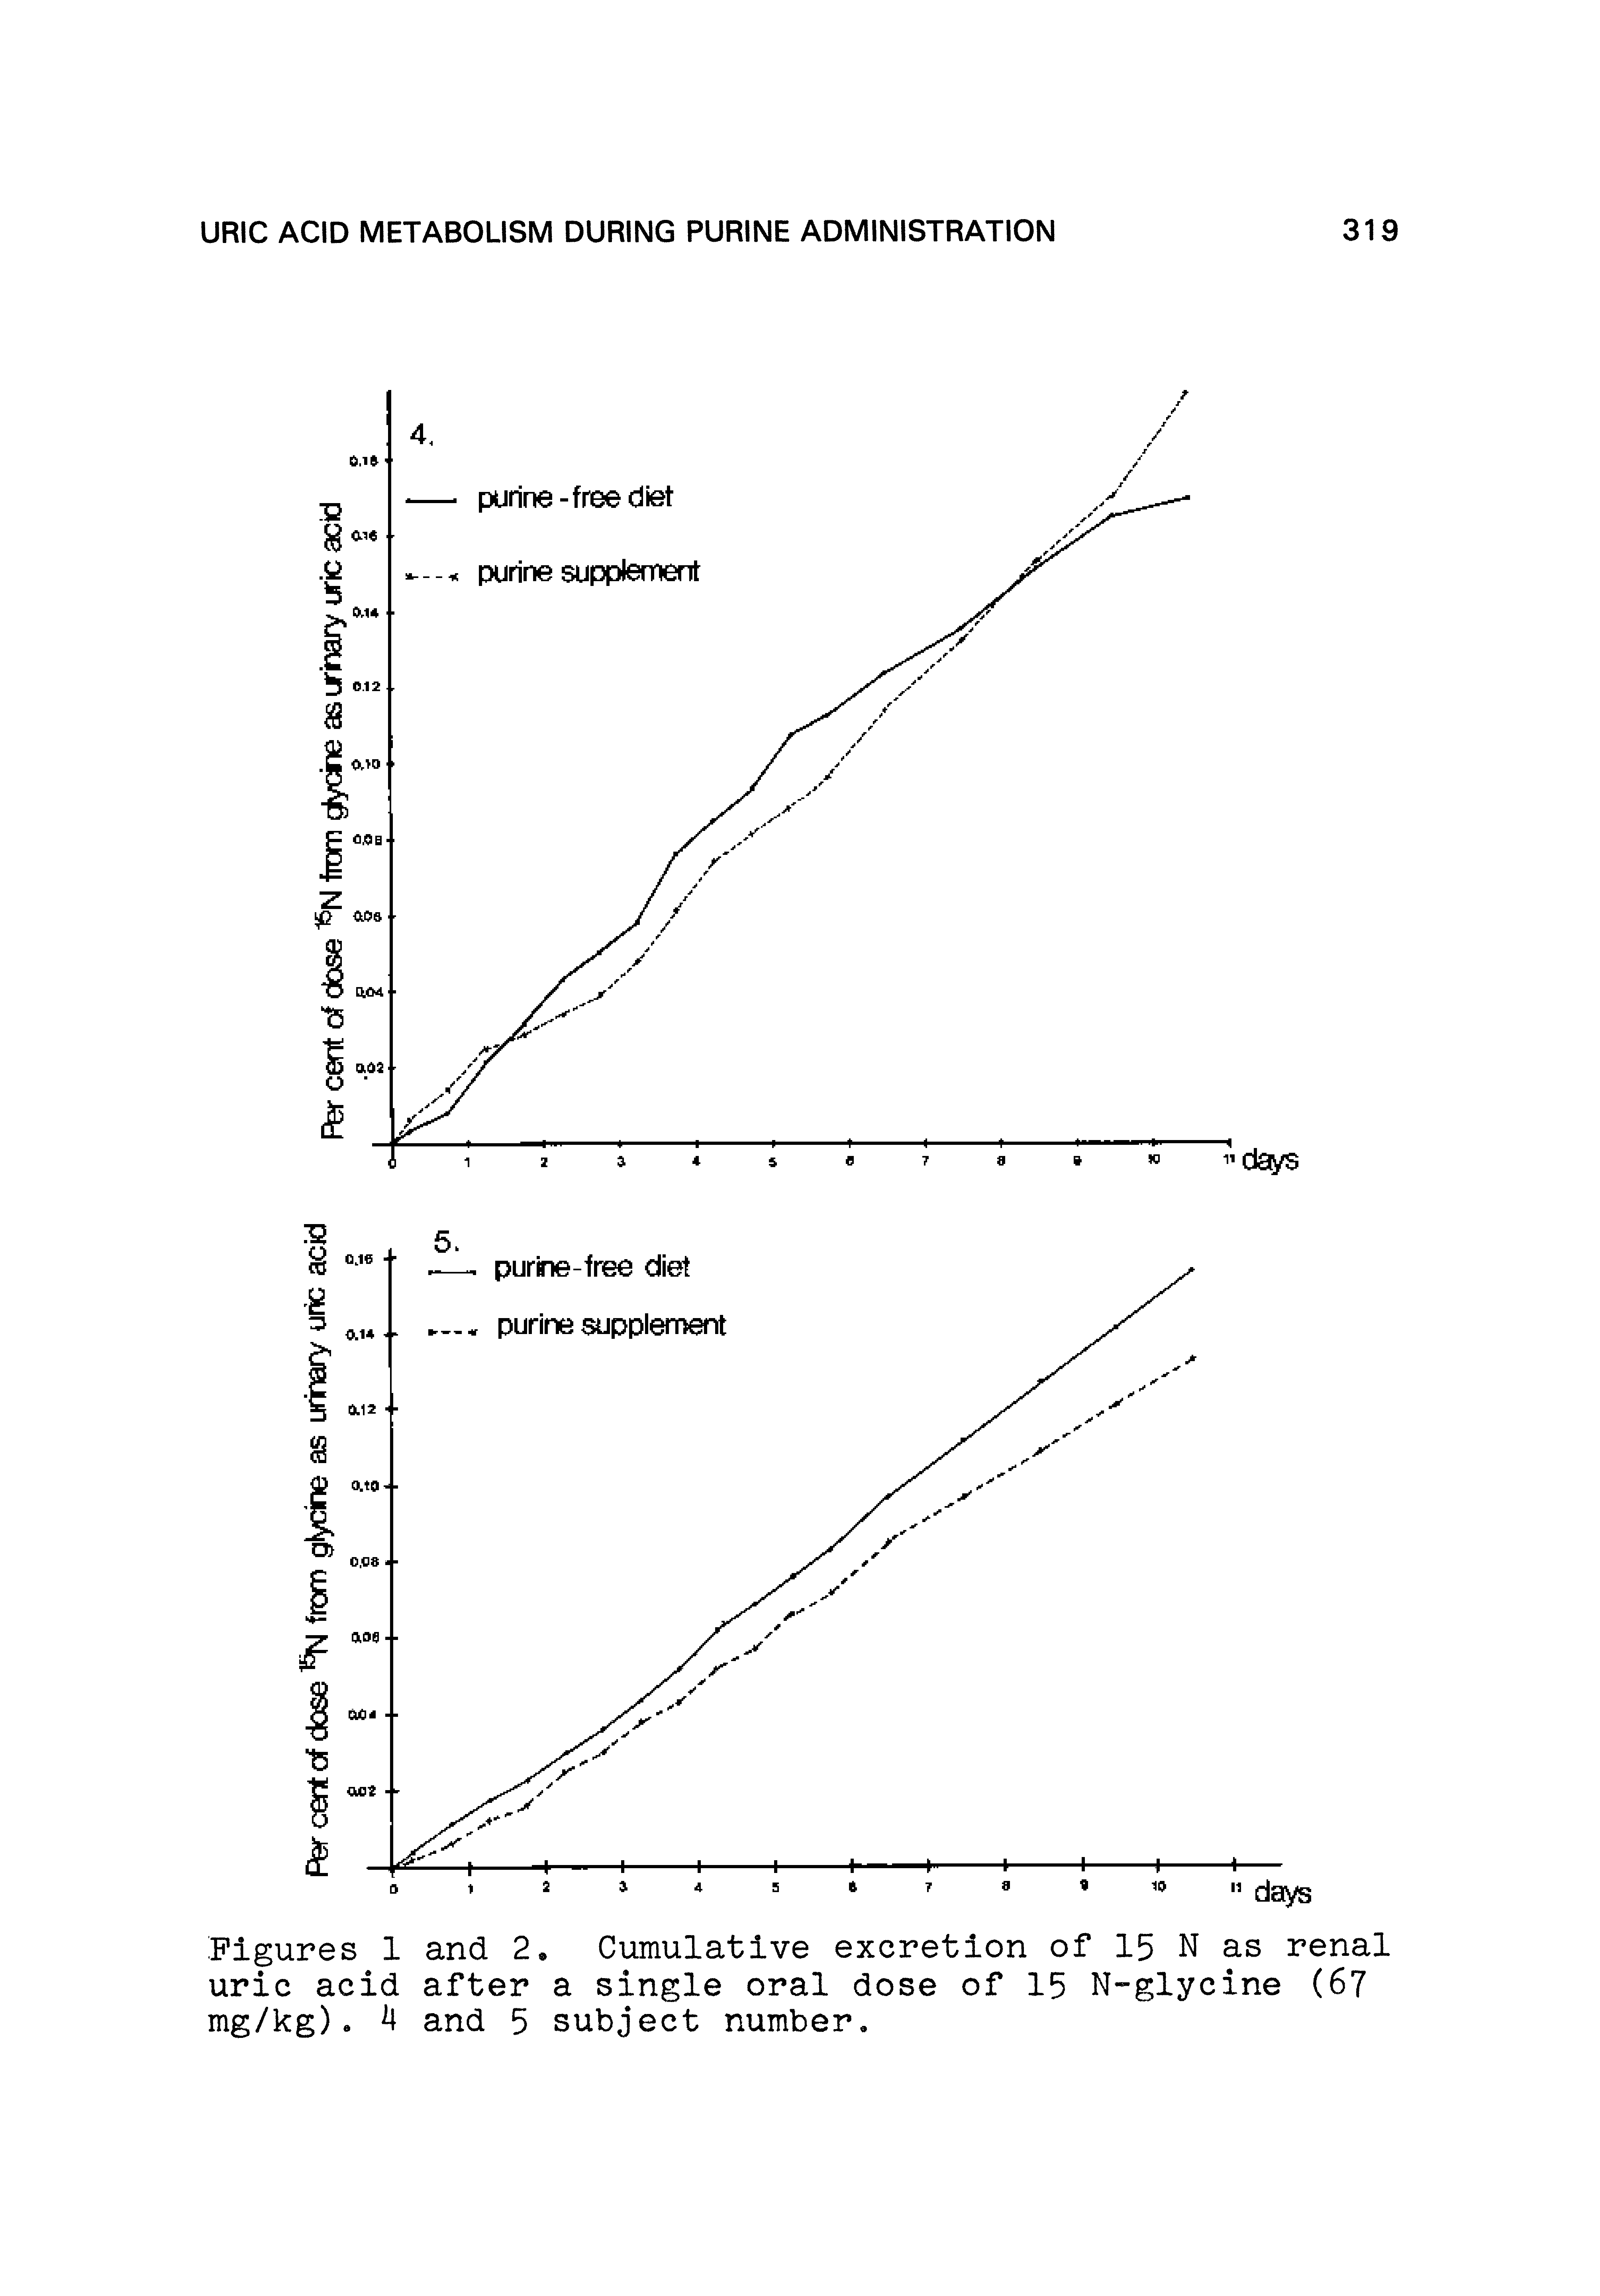 Figures 1 and 2. Cumulative excretion of 15 N as renal uric acid after a single oral dose of 15 N-glycine (67 mg/kg). 4 and 5 subject number.